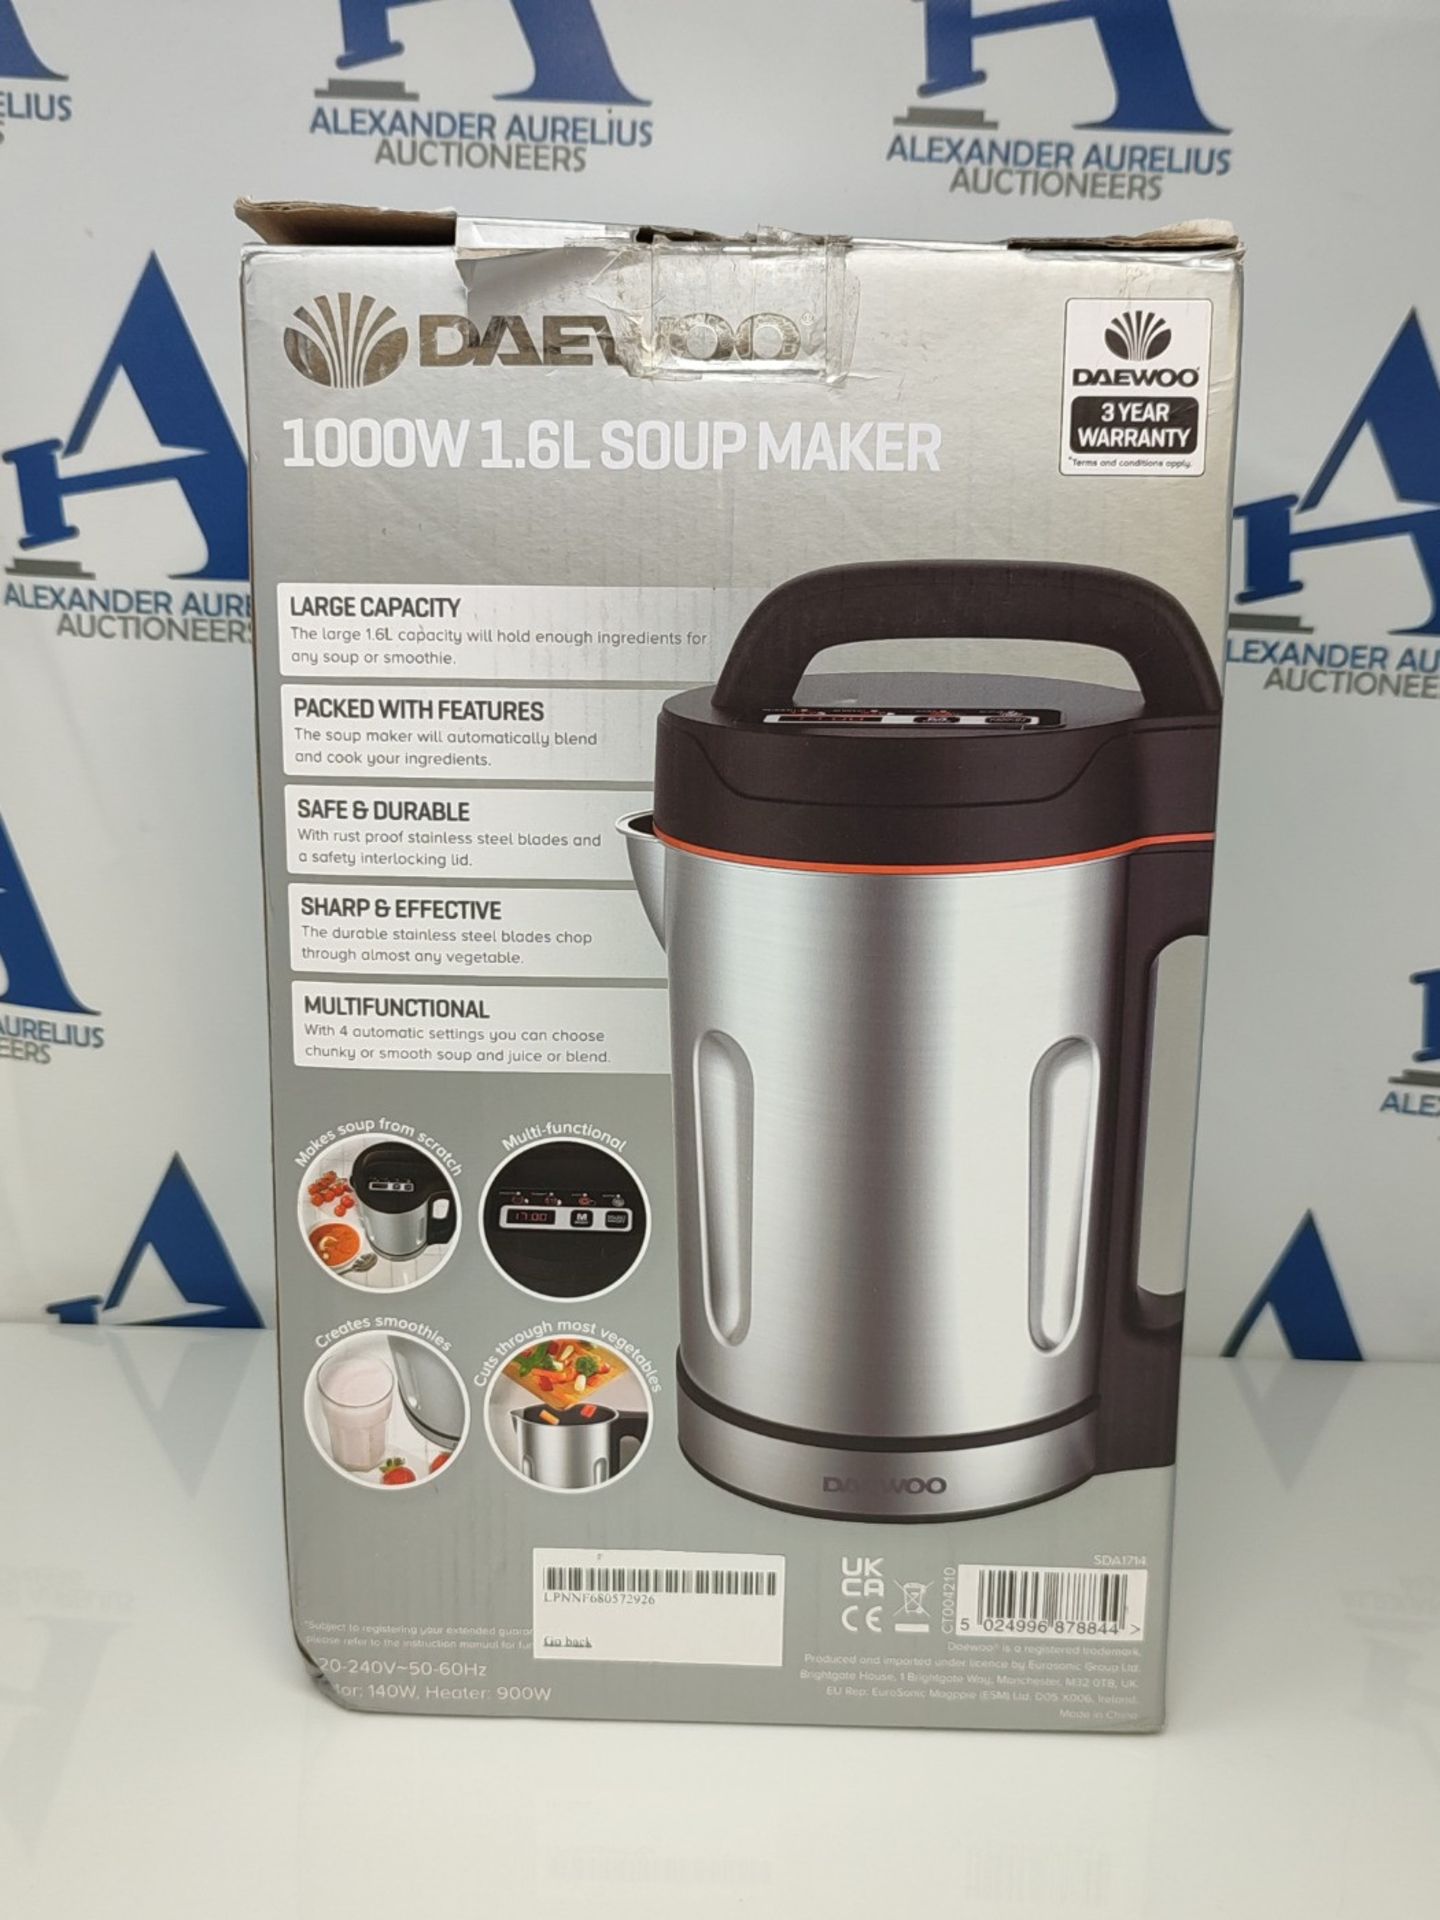 Daewoo SDA1714 Soup Maker | Usage-1000W | 1.6L Capacity | Ideal for Smooth & Chunky So - Bild 2 aus 3